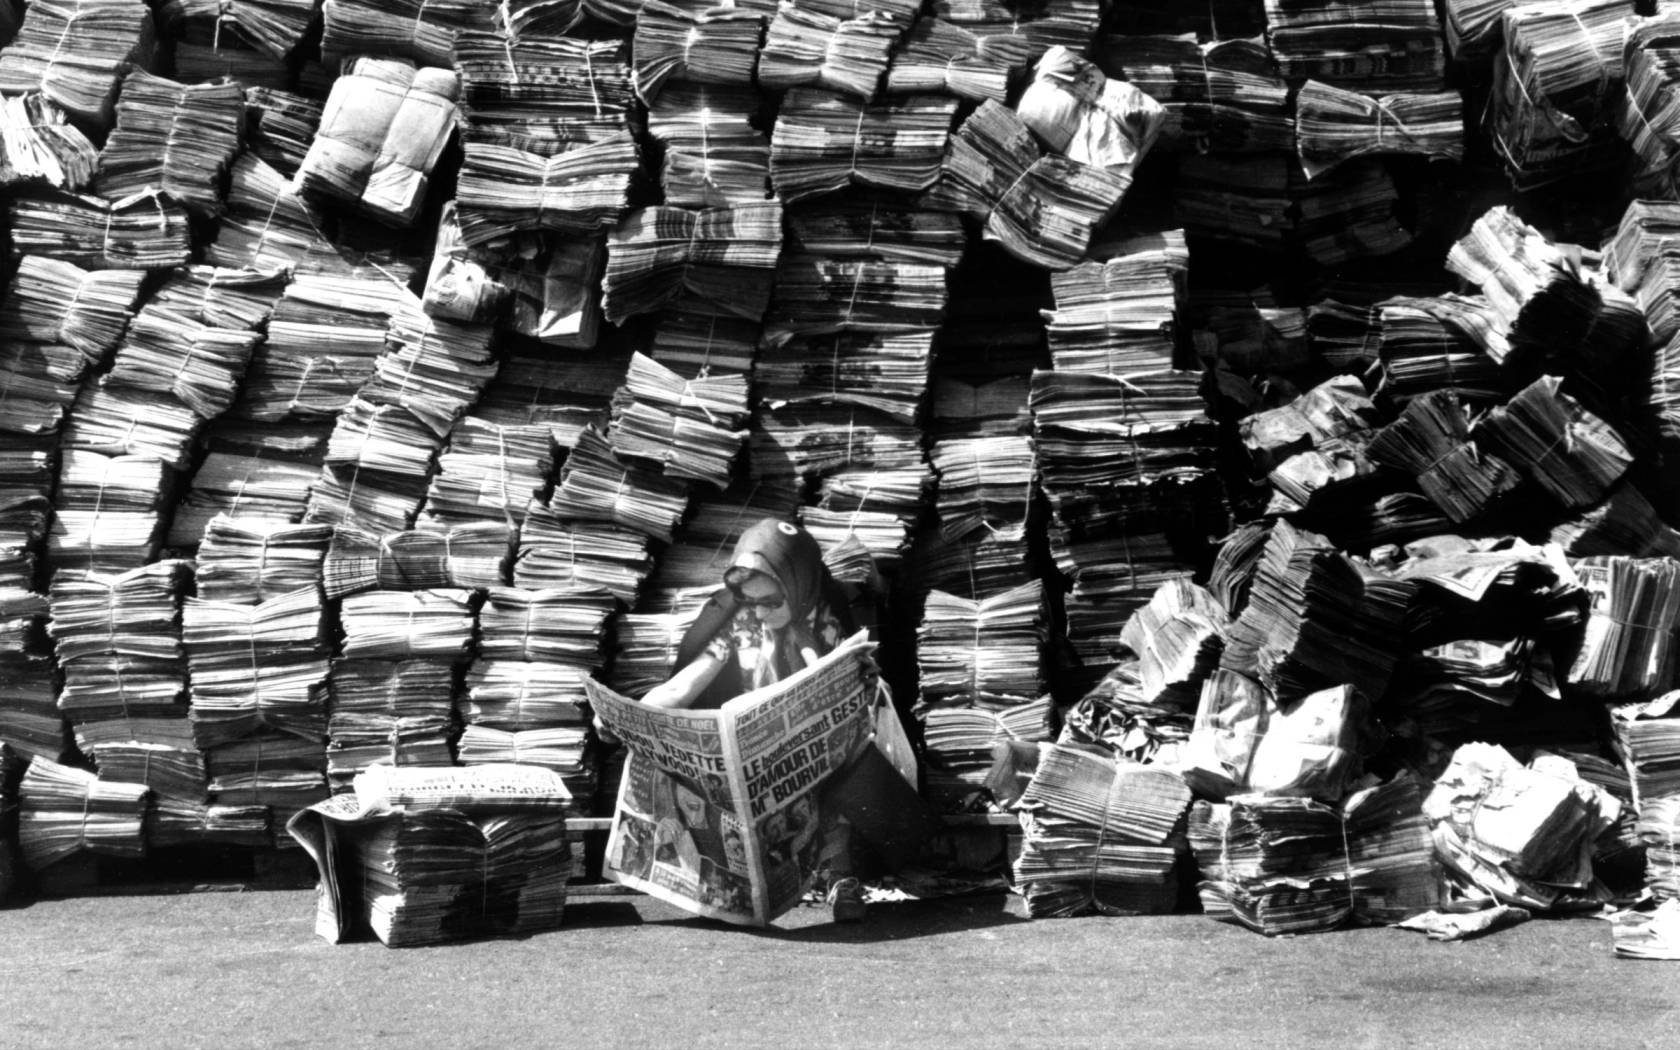 Woman reading a newspaper in front of a big pile of newspapers.